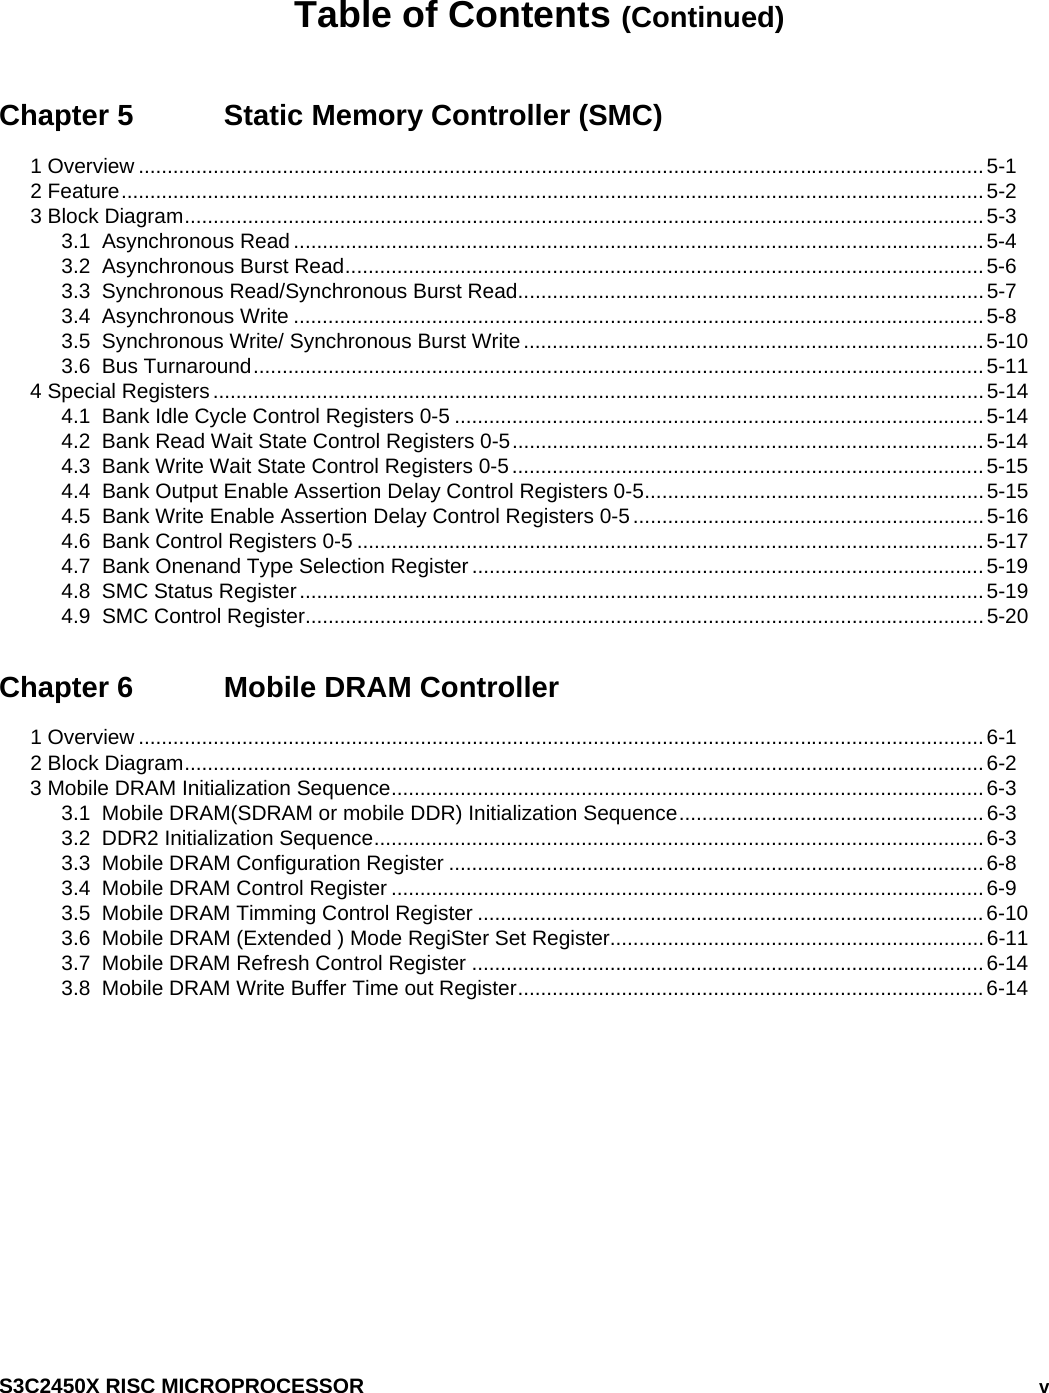    S3C2450X RISC MICROPROCESSOR   v Table of Contents (Continued) Chapter 5    Static Memory Controller (SMC) 1 Overview ...................................................................................................................................................5-1 2 Feature......................................................................................................................................................5-2 3 Block Diagram...........................................................................................................................................5-3 3.1  Asynchronous Read ........................................................................................................................5-4 3.2  Asynchronous Burst Read...............................................................................................................5-6 3.3  Synchronous Read/Synchronous Burst Read................................................................................. 5-7 3.4  Asynchronous Write ........................................................................................................................5-8 3.5  Synchronous Write/ Synchronous Burst Write................................................................................5-10 3.6  Bus Turnaround...............................................................................................................................5-11 4 Special Registers ......................................................................................................................................5-14 4.1  Bank Idle Cycle Control Registers 0-5 ............................................................................................5-14 4.2  Bank Read Wait State Control Registers 0-5..................................................................................5-14 4.3  Bank Write Wait State Control Registers 0-5 ..................................................................................5-15 4.4  Bank Output Enable Assertion Delay Control Registers 0-5...........................................................5-15 4.5  Bank Write Enable Assertion Delay Control Registers 0-5 .............................................................5-16 4.6  Bank Control Registers 0-5 .............................................................................................................5-17 4.7  Bank Onenand Type Selection Register .........................................................................................5-19 4.8  SMC Status Register.......................................................................................................................5-19 4.9  SMC Control Register......................................................................................................................5-20 Chapter 6    Mobile DRAM Controller 1 Overview ...................................................................................................................................................6-1 2 Block Diagram...........................................................................................................................................6-2 3 Mobile DRAM Initialization Sequence.......................................................................................................6-3 3.1  Mobile DRAM(SDRAM or mobile DDR) Initialization Sequence.....................................................6-3 3.2  DDR2 Initialization Sequence..........................................................................................................6-3 3.3  Mobile DRAM Configuration Register .............................................................................................6-8 3.4  Mobile DRAM Control Register .......................................................................................................6-9 3.5  Mobile DRAM Timming Control Register ........................................................................................6-10 3.6  Mobile DRAM (Extended ) Mode RegiSter Set Register.................................................................6-11 3.7  Mobile DRAM Refresh Control Register .........................................................................................6-14 3.8  Mobile DRAM Write Buffer Time out Register.................................................................................6-14  